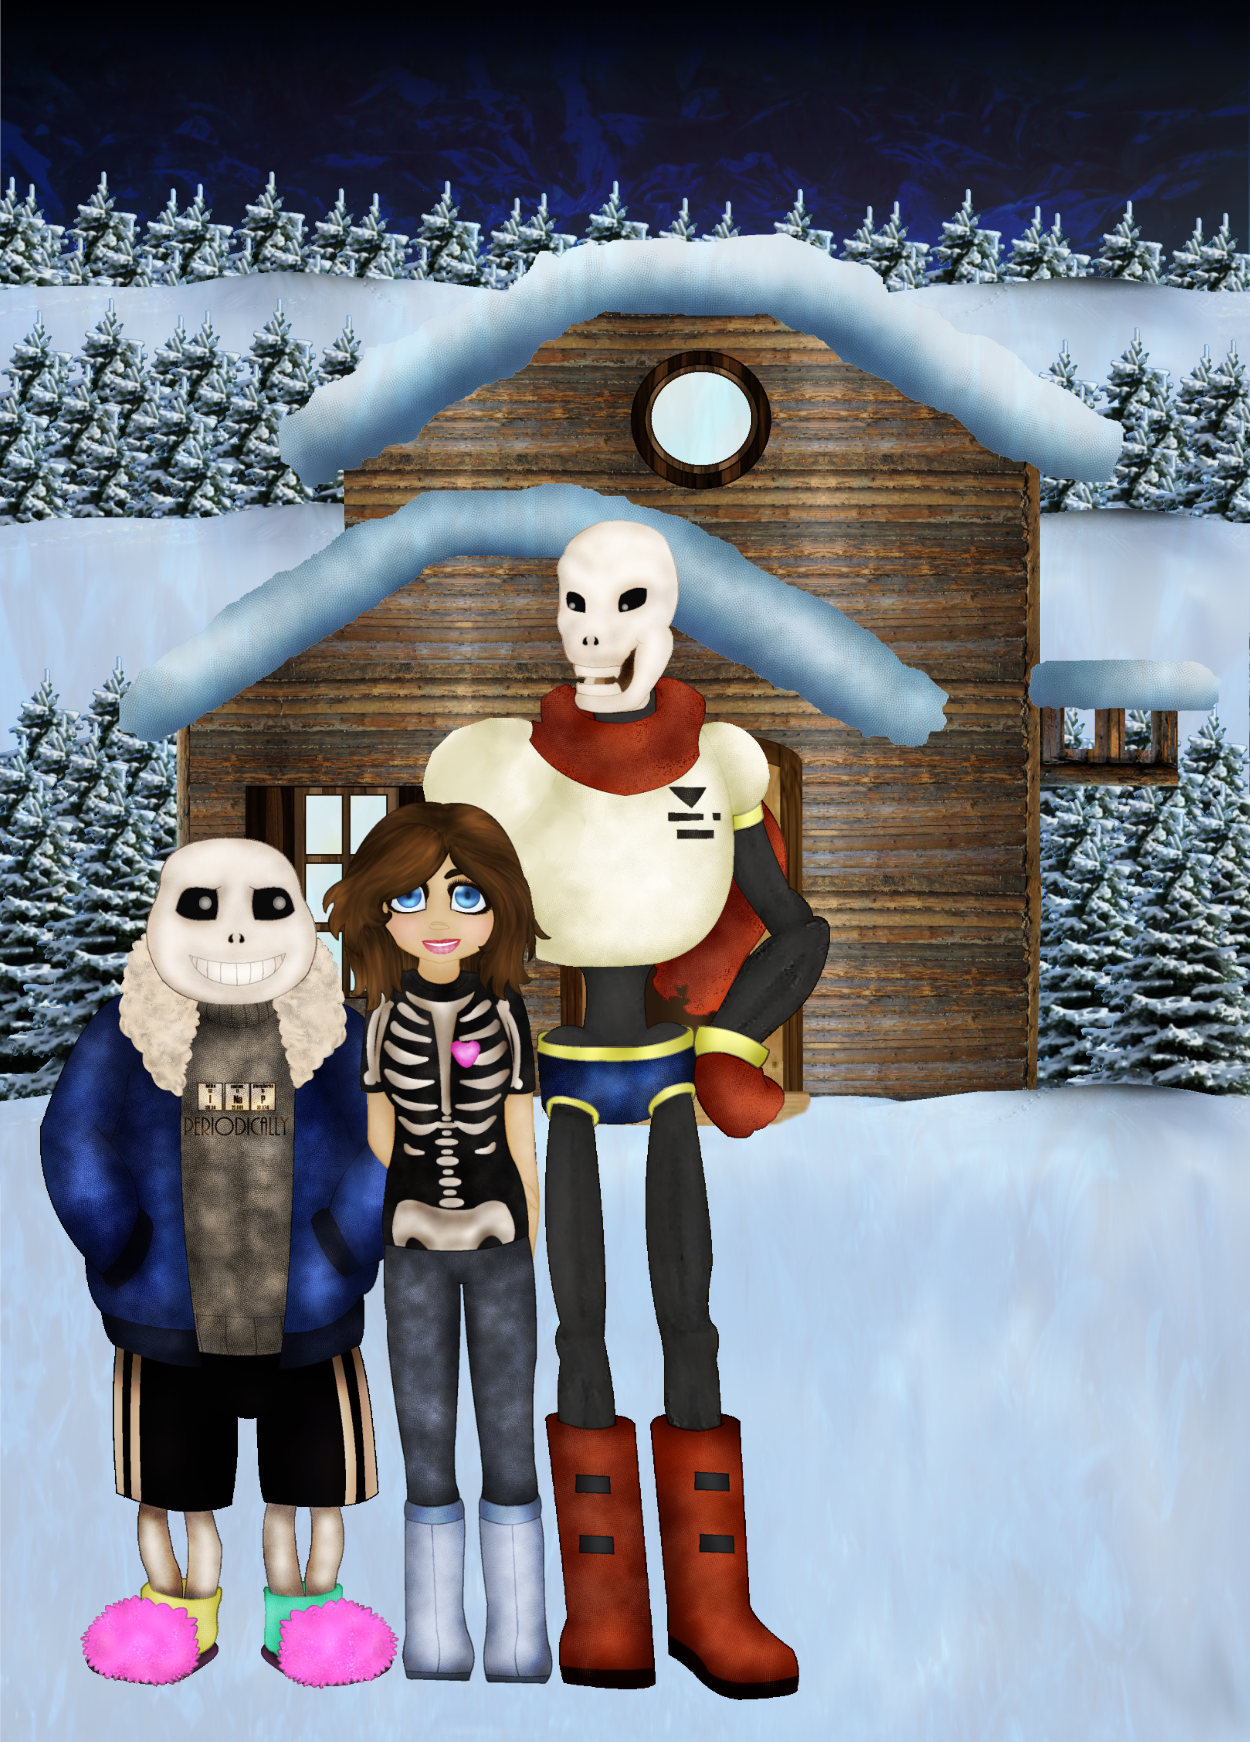 Sans And Papyrus House With Crew By Turtlechix On Deviantart